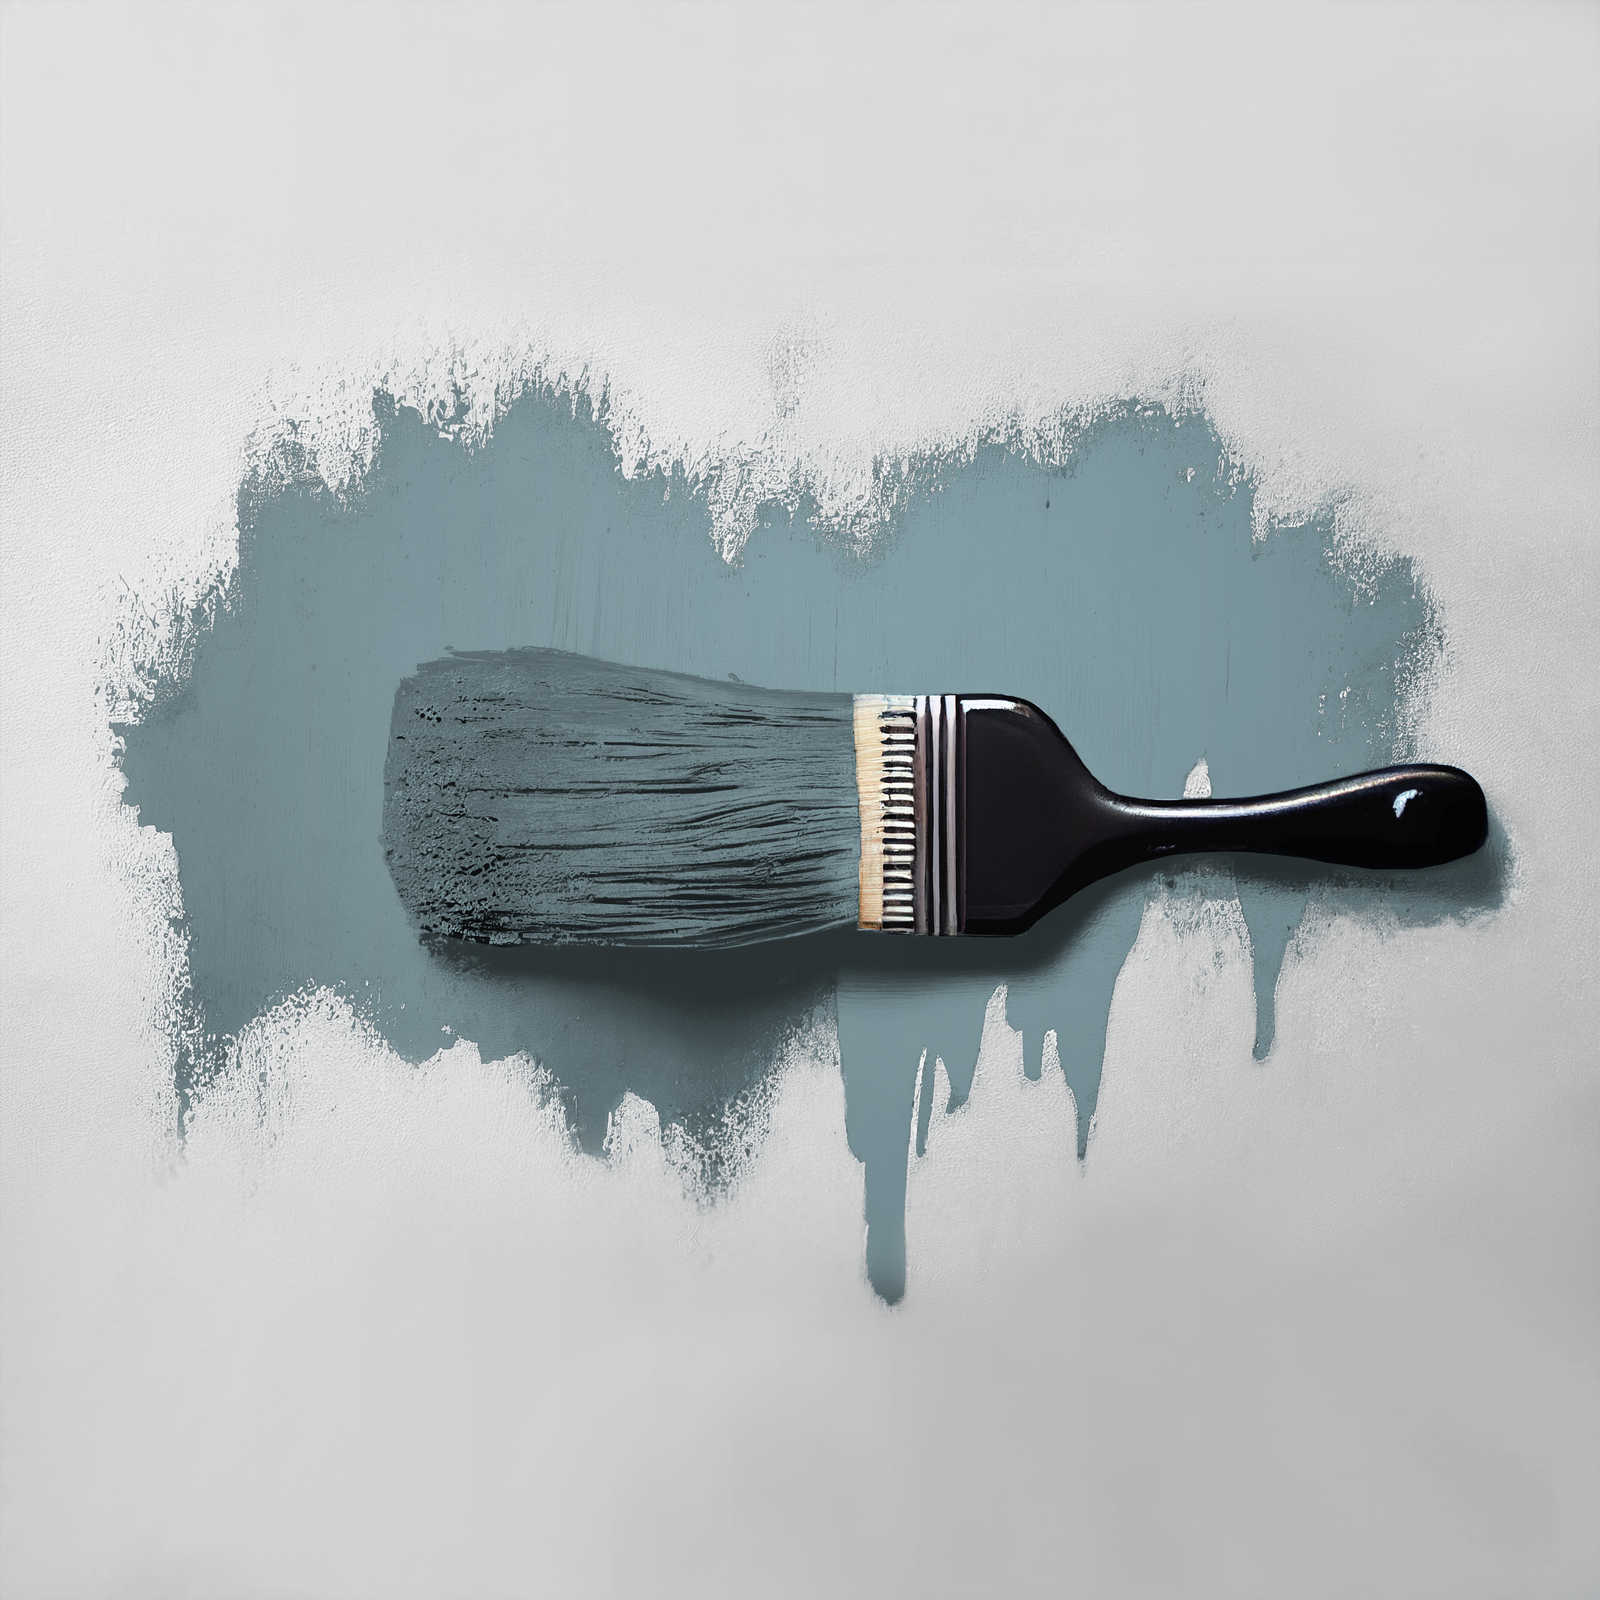             Wall Paint TCK3010 »Typical Trout« in light blue-grey – 5.0 litre
        